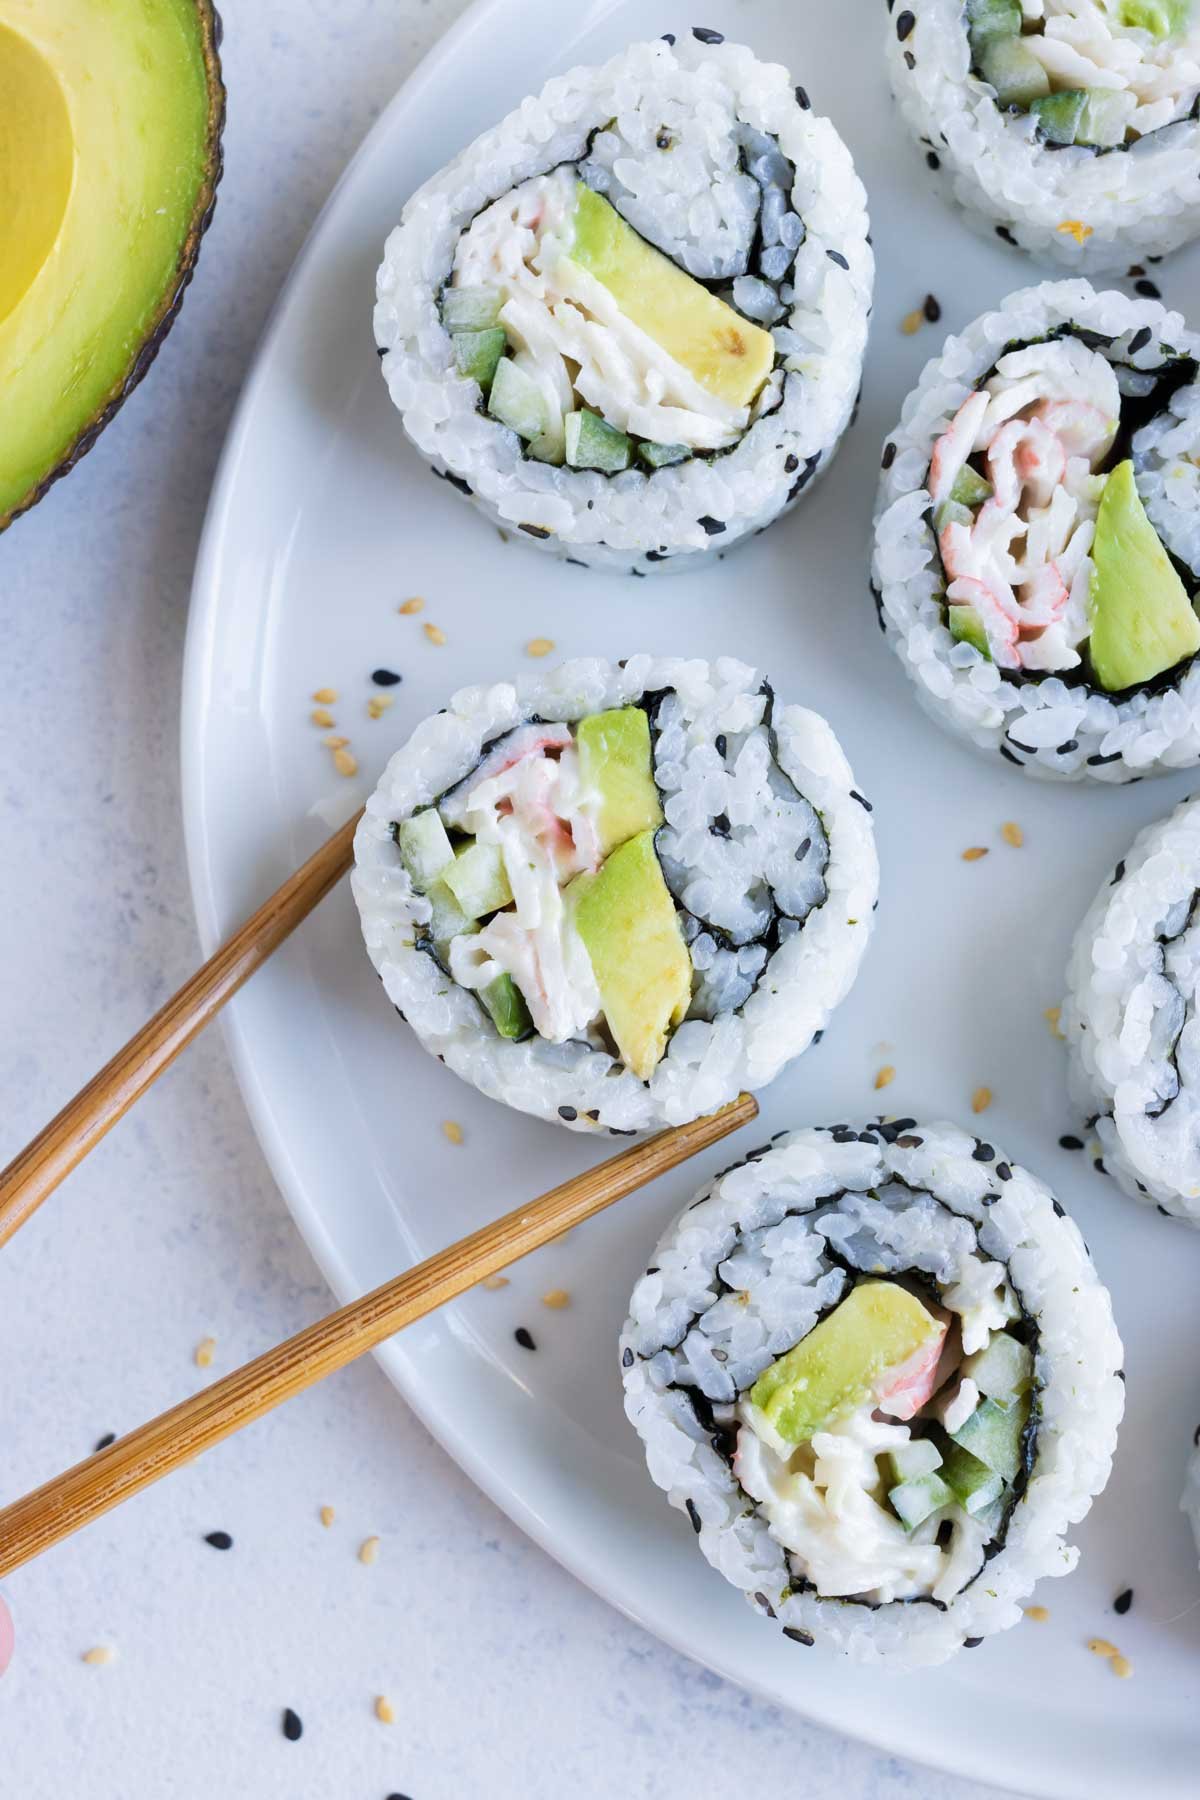 Chopsticks are shown picking up a sushi roll from a plate.